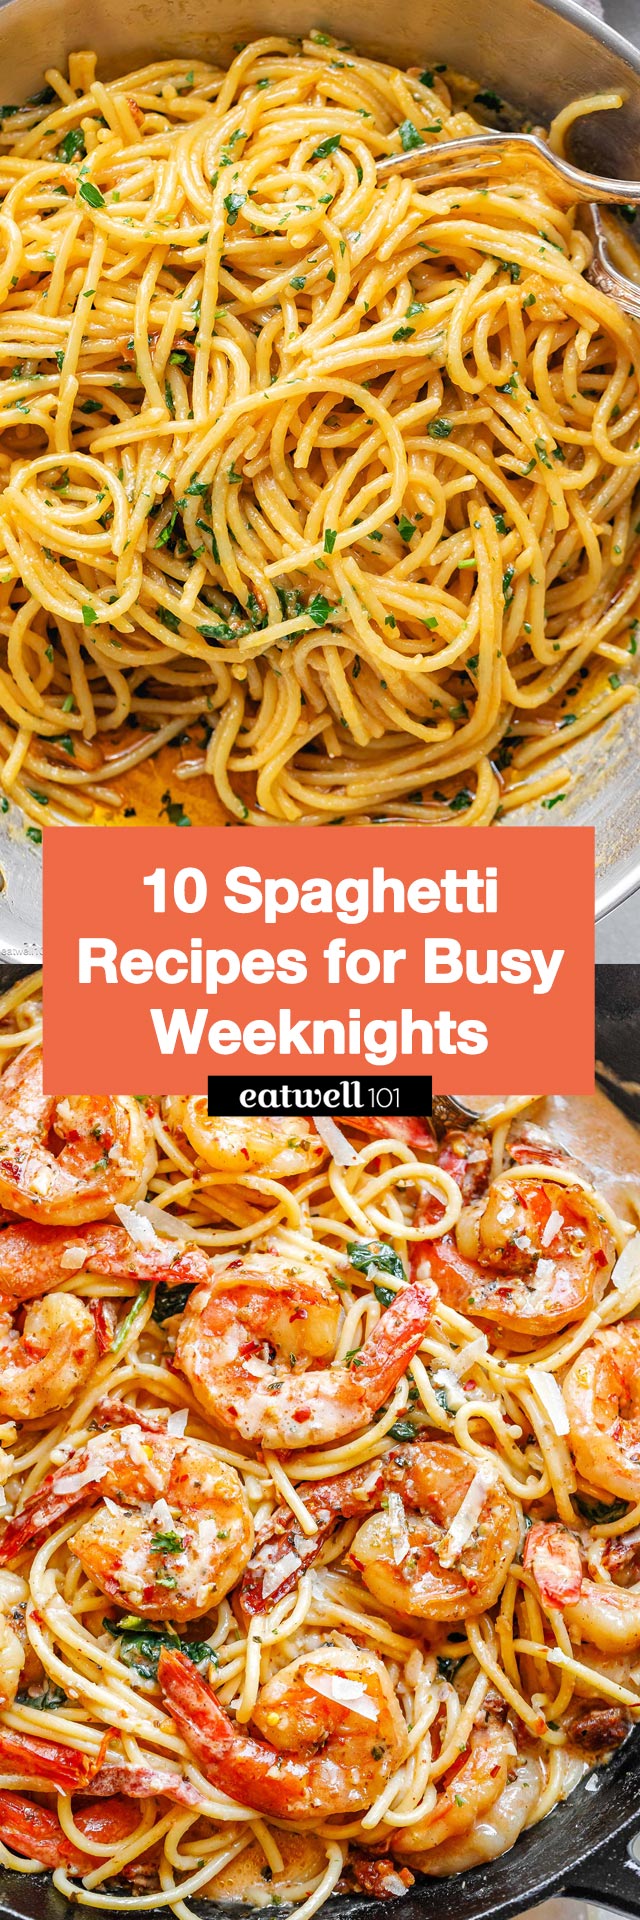 10 Easy Spaghetti Recipes For Busy Weeknights - #spaghetti #pasta #recipes #eatwell101 - These unique and tasty spaghetti recipes are filled with creative twists. From spaghetti in red wine sauce to garlic butter spaghetti, these spaghetti pasta recipes will make your taste buds dance!